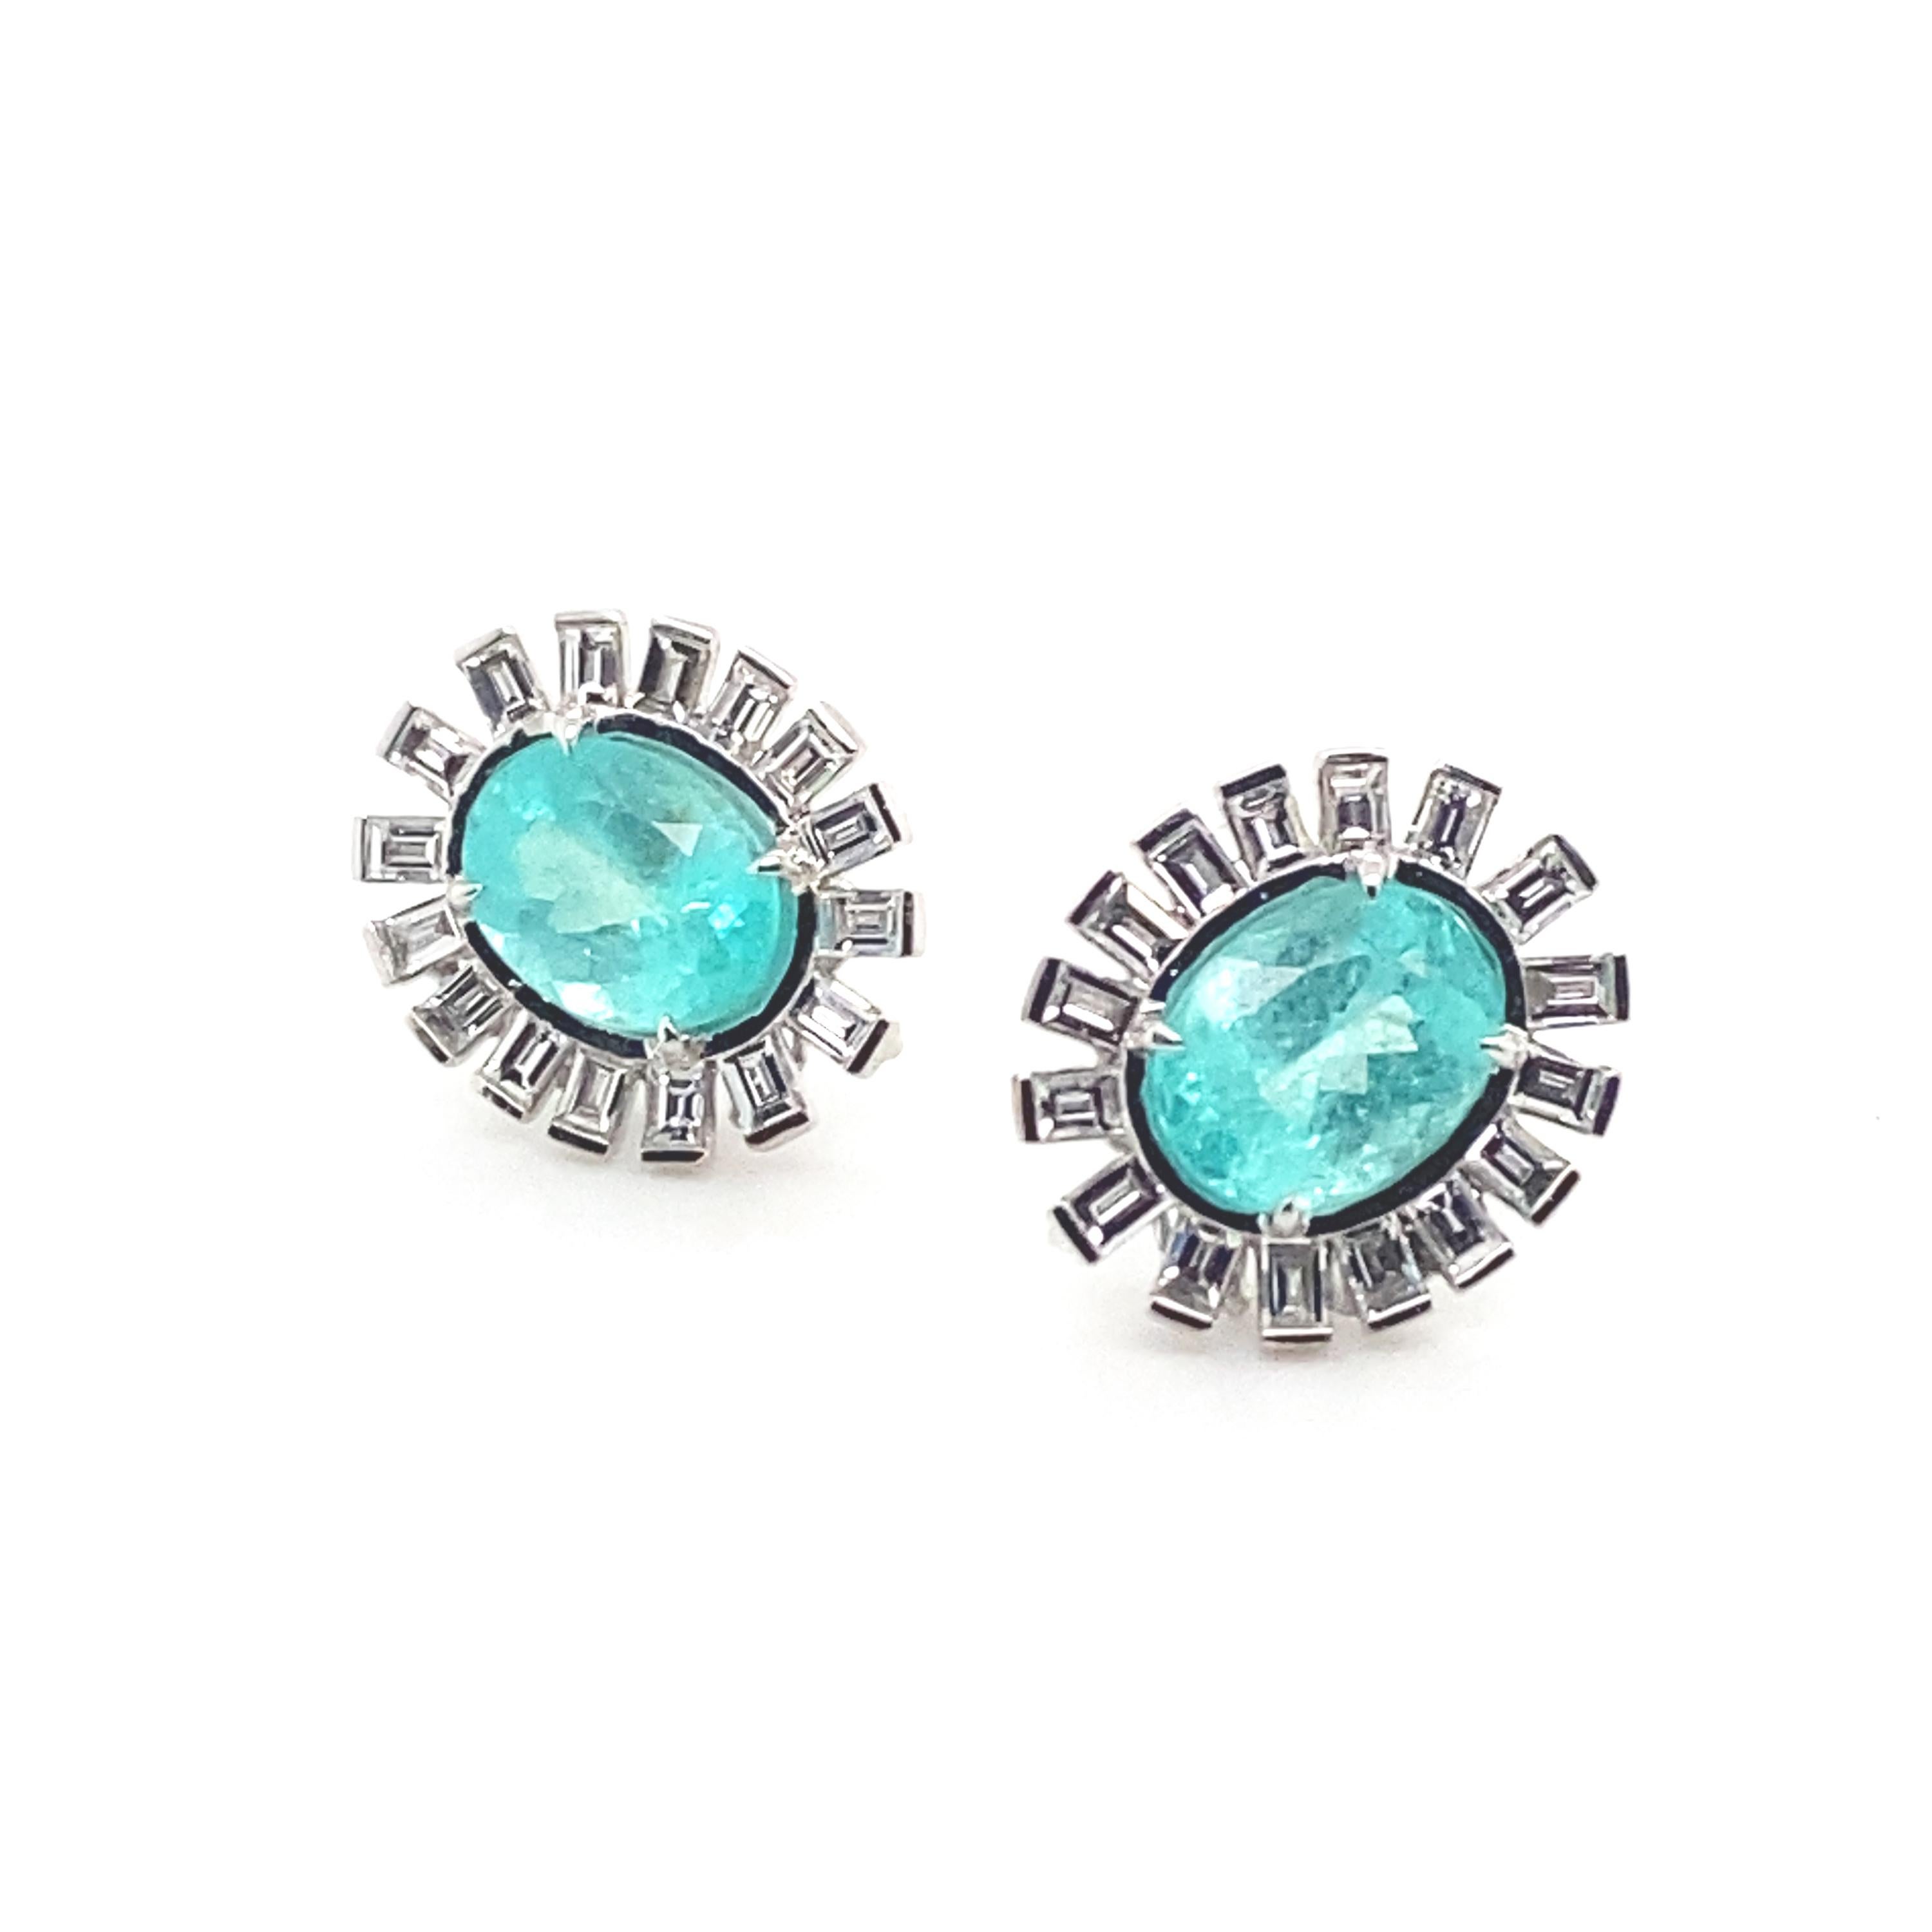 Paraiba and Diamond Earrings set in 18 karat White Gold with 7.82-carat Paraiba and 2.11-carat Rose-cut White Diamonds. This piece and the stones are very special and part of COOMI's Trinity Collection which is inspired by the harmony and unity of